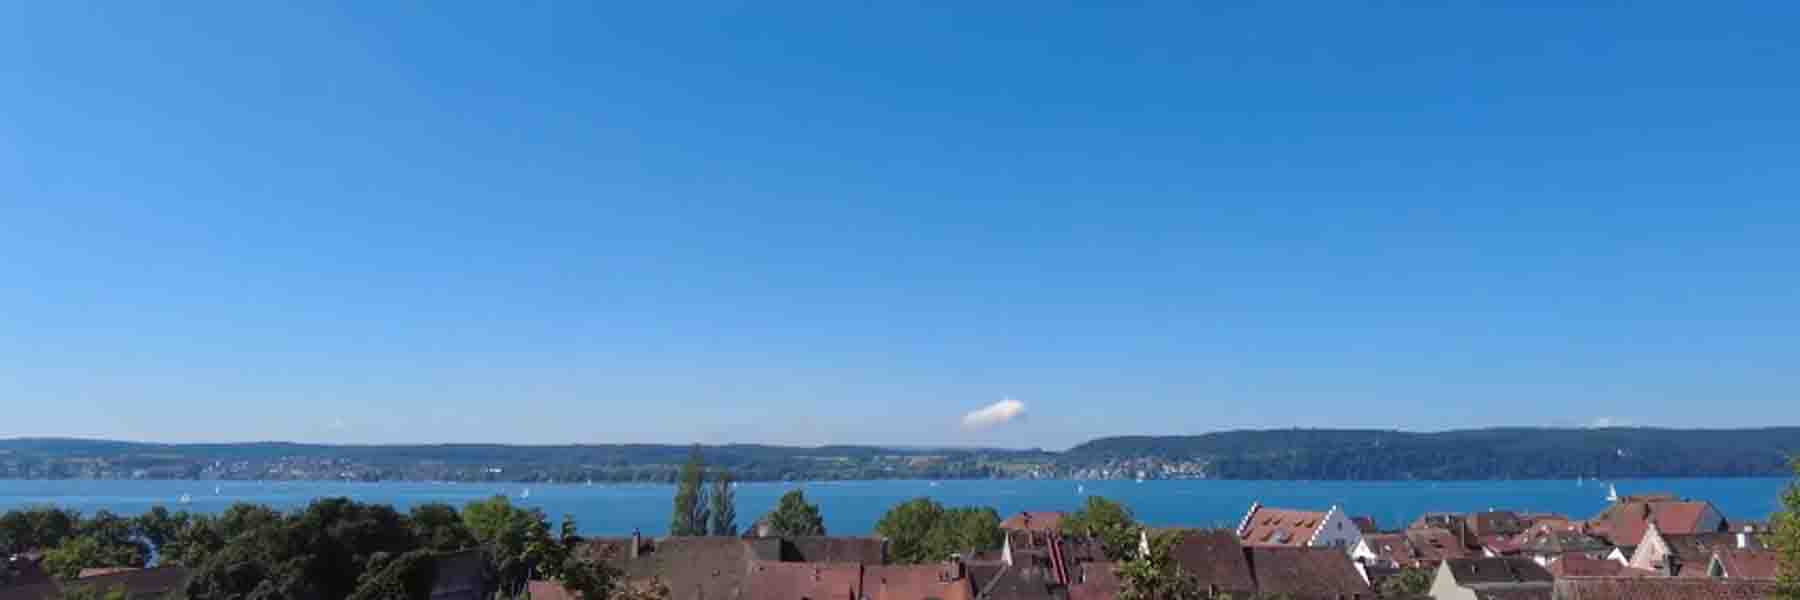 Immobilien Bodensee mit Seeblick